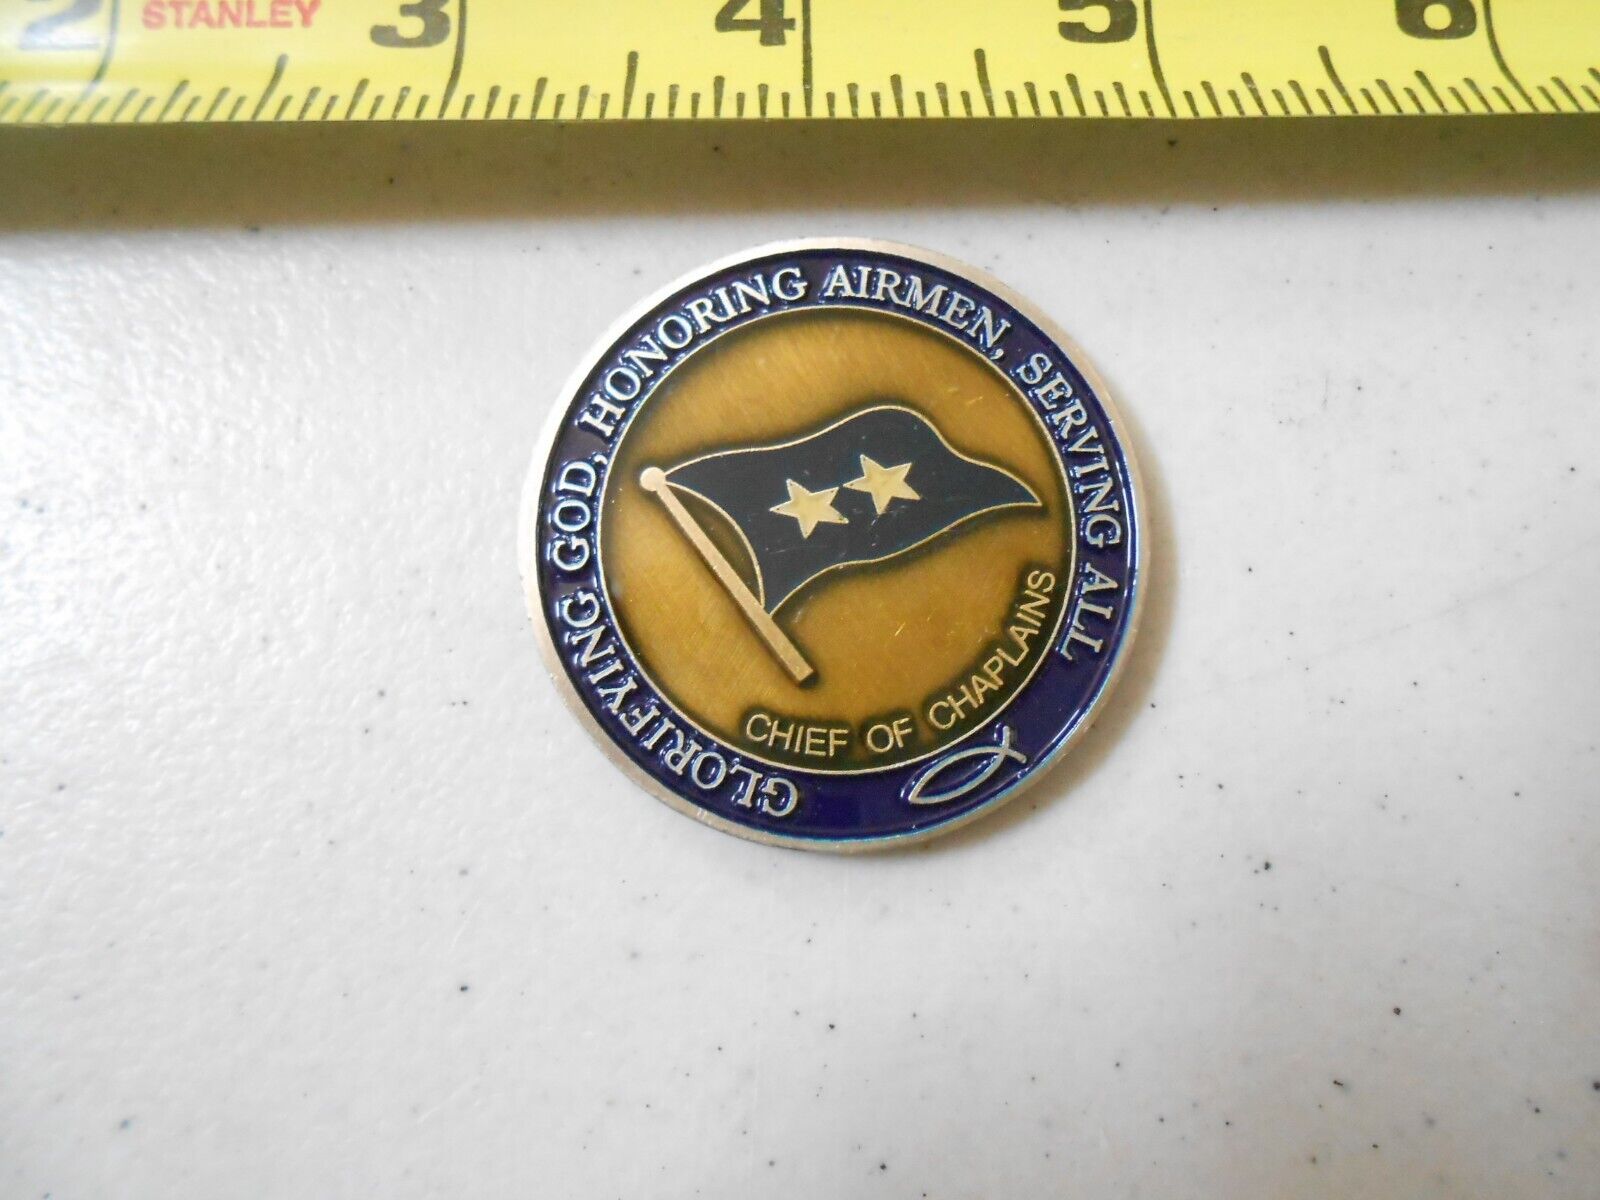 RARE CHIEF OF CHAPLAINS SERVICE FAITH USAF AIR FORCE MILITARY CHALLENGE COIN